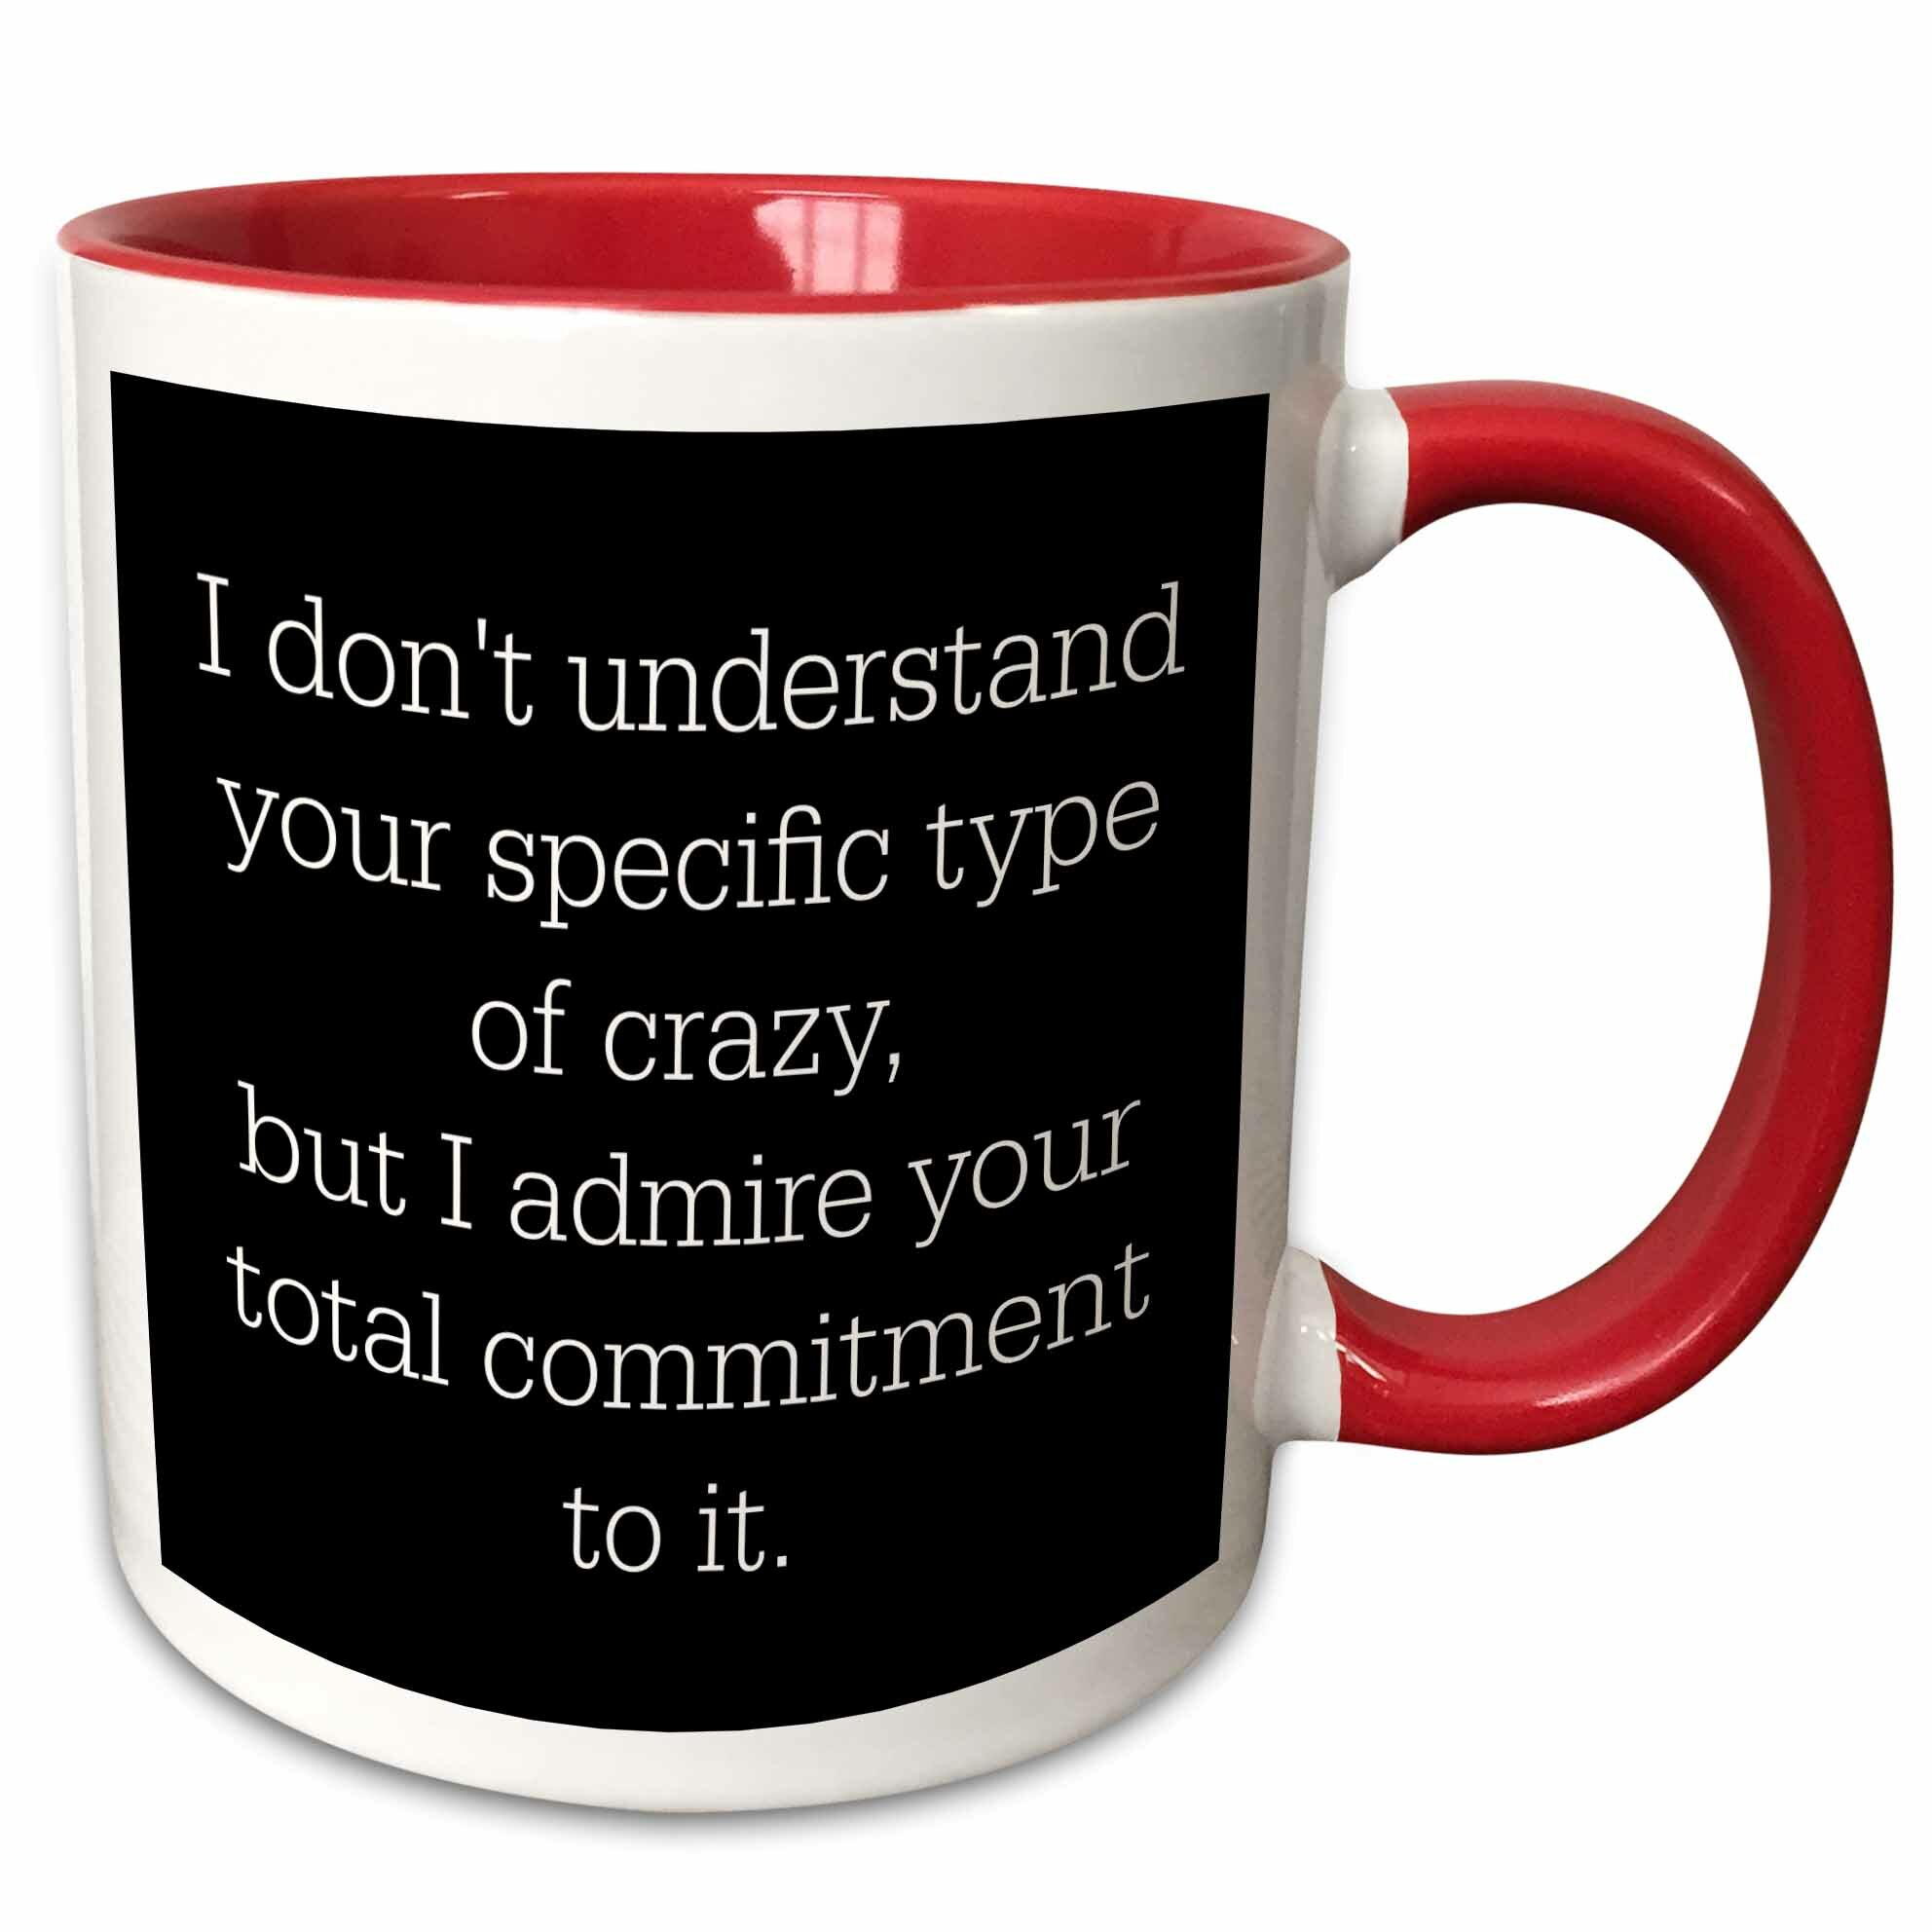 Symple Stuff Fenley I Dont Understand Your Type Of Crazy But I Admire Your Commitment Coffee Mug Wayfair